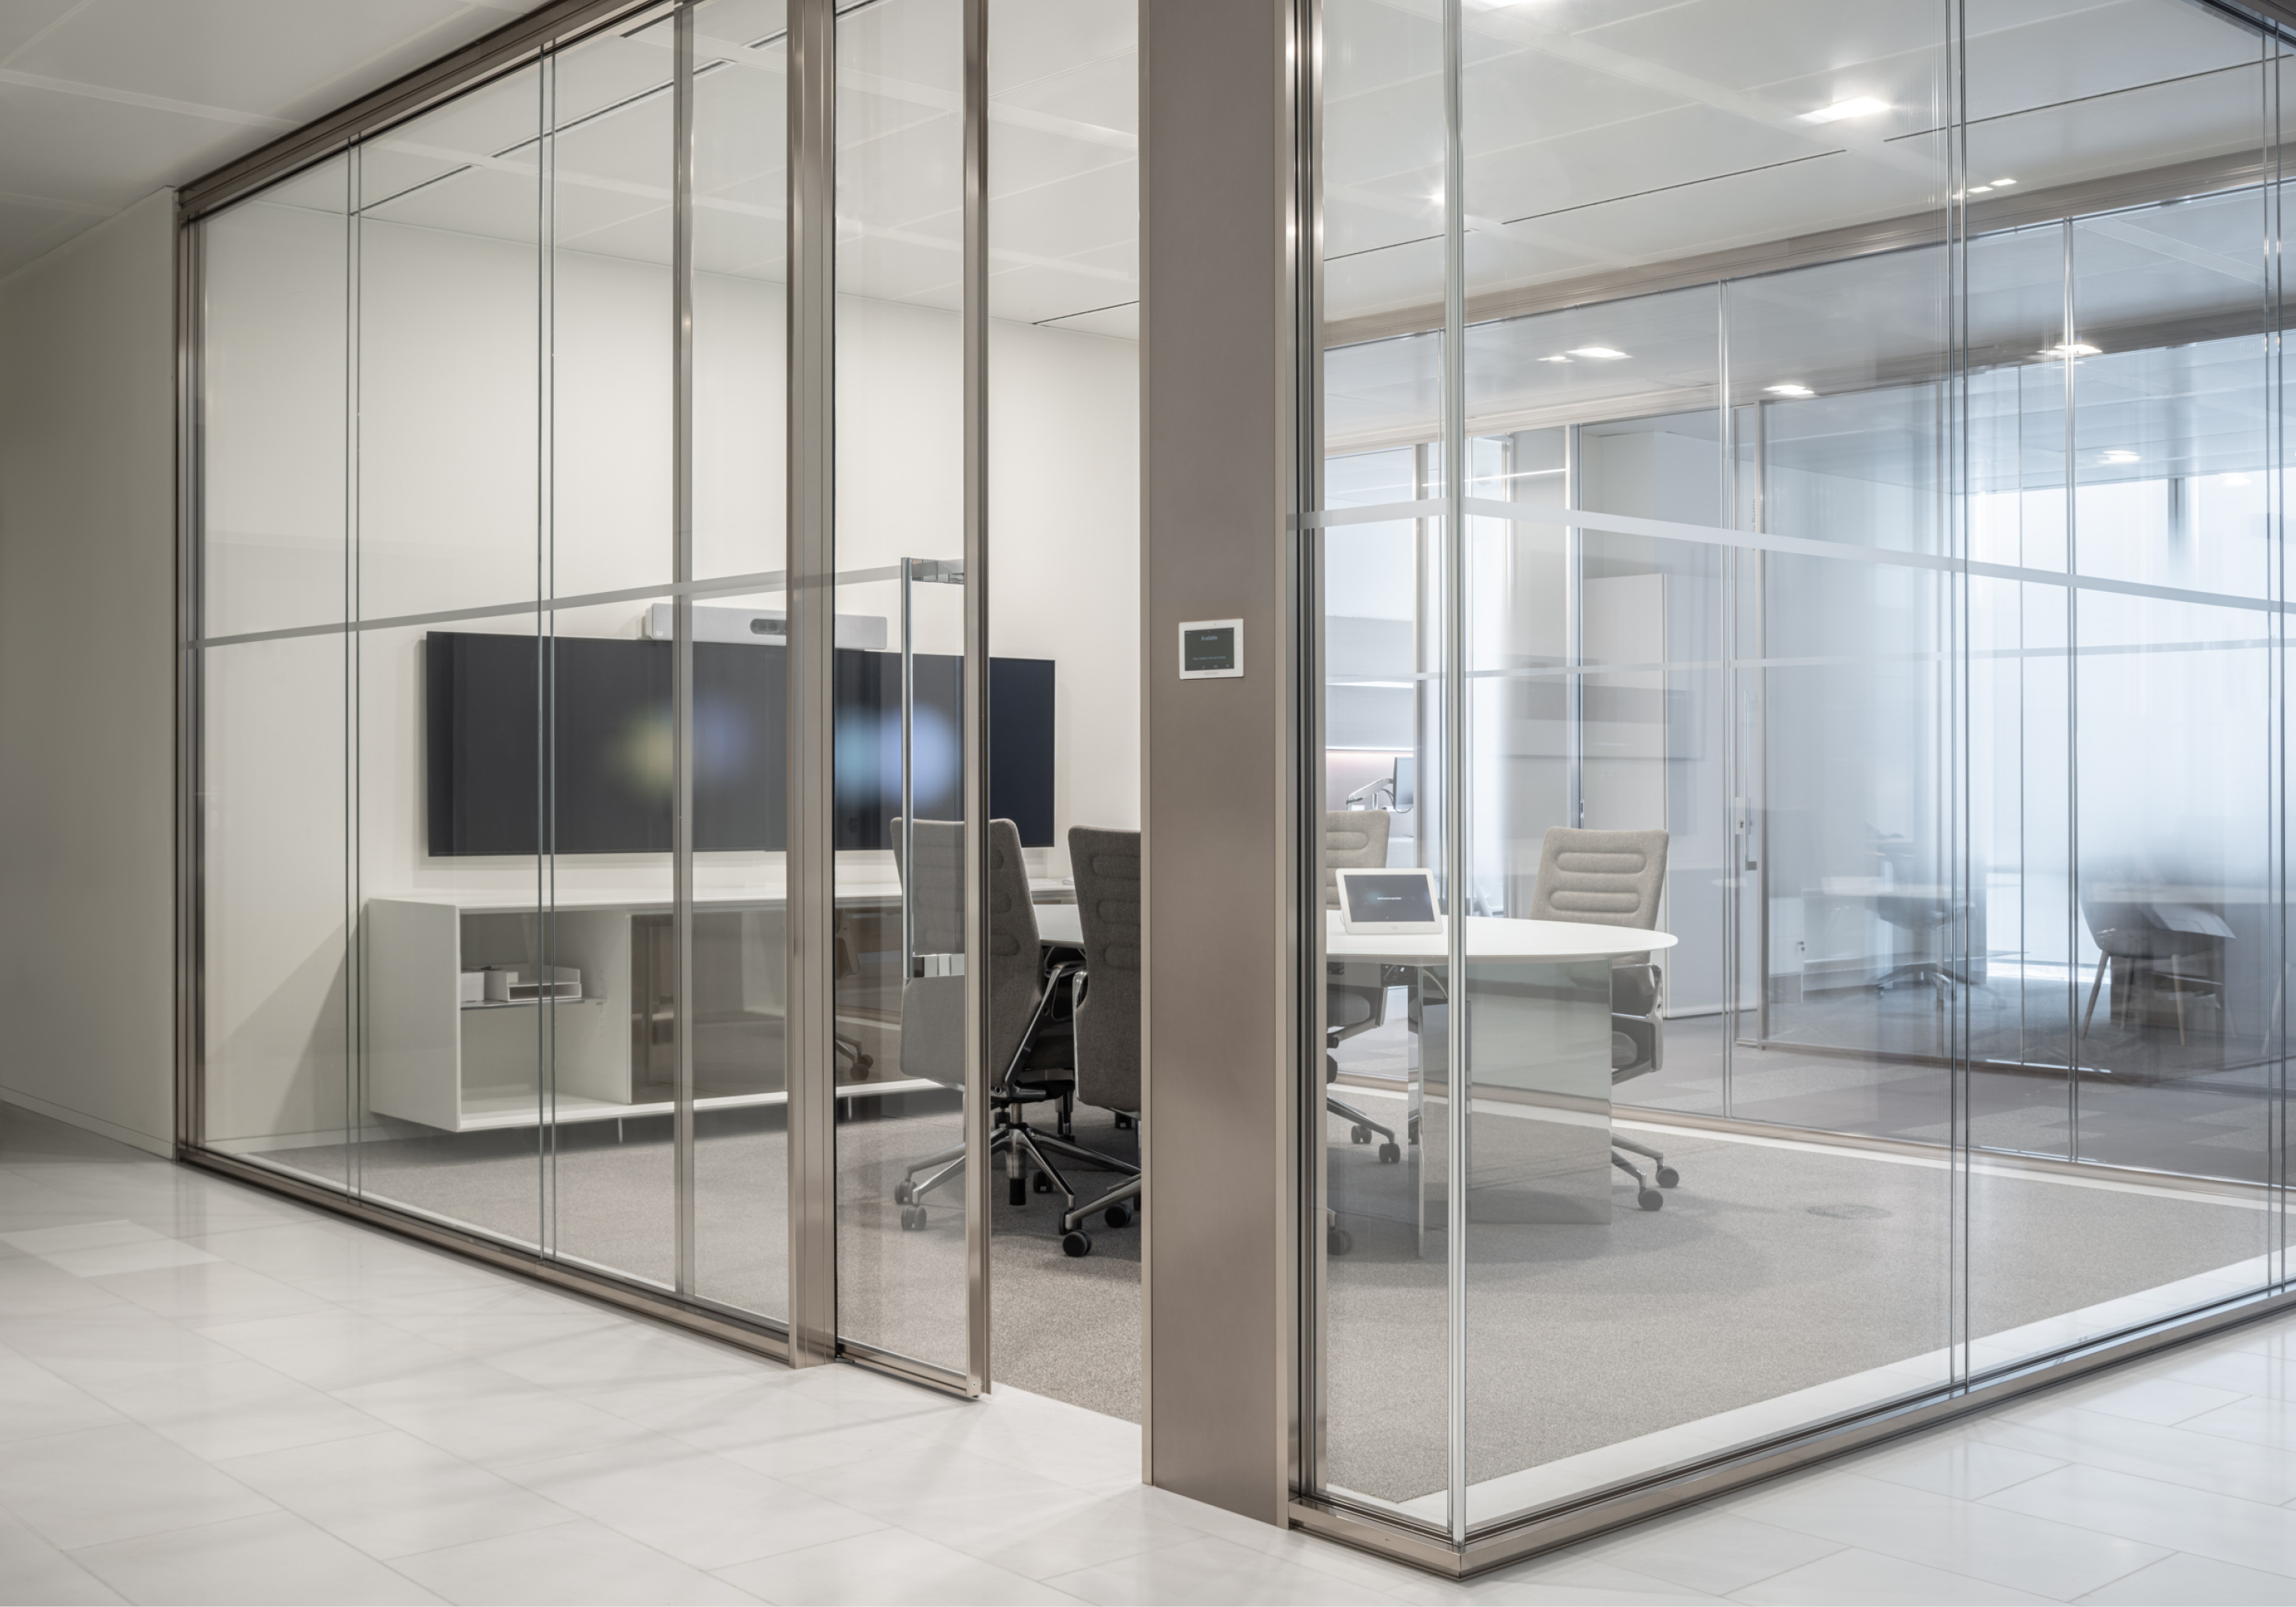 UniFor’s Supersincro sliding door system provides the flexibility to turn meeting rooms into open-space work areas